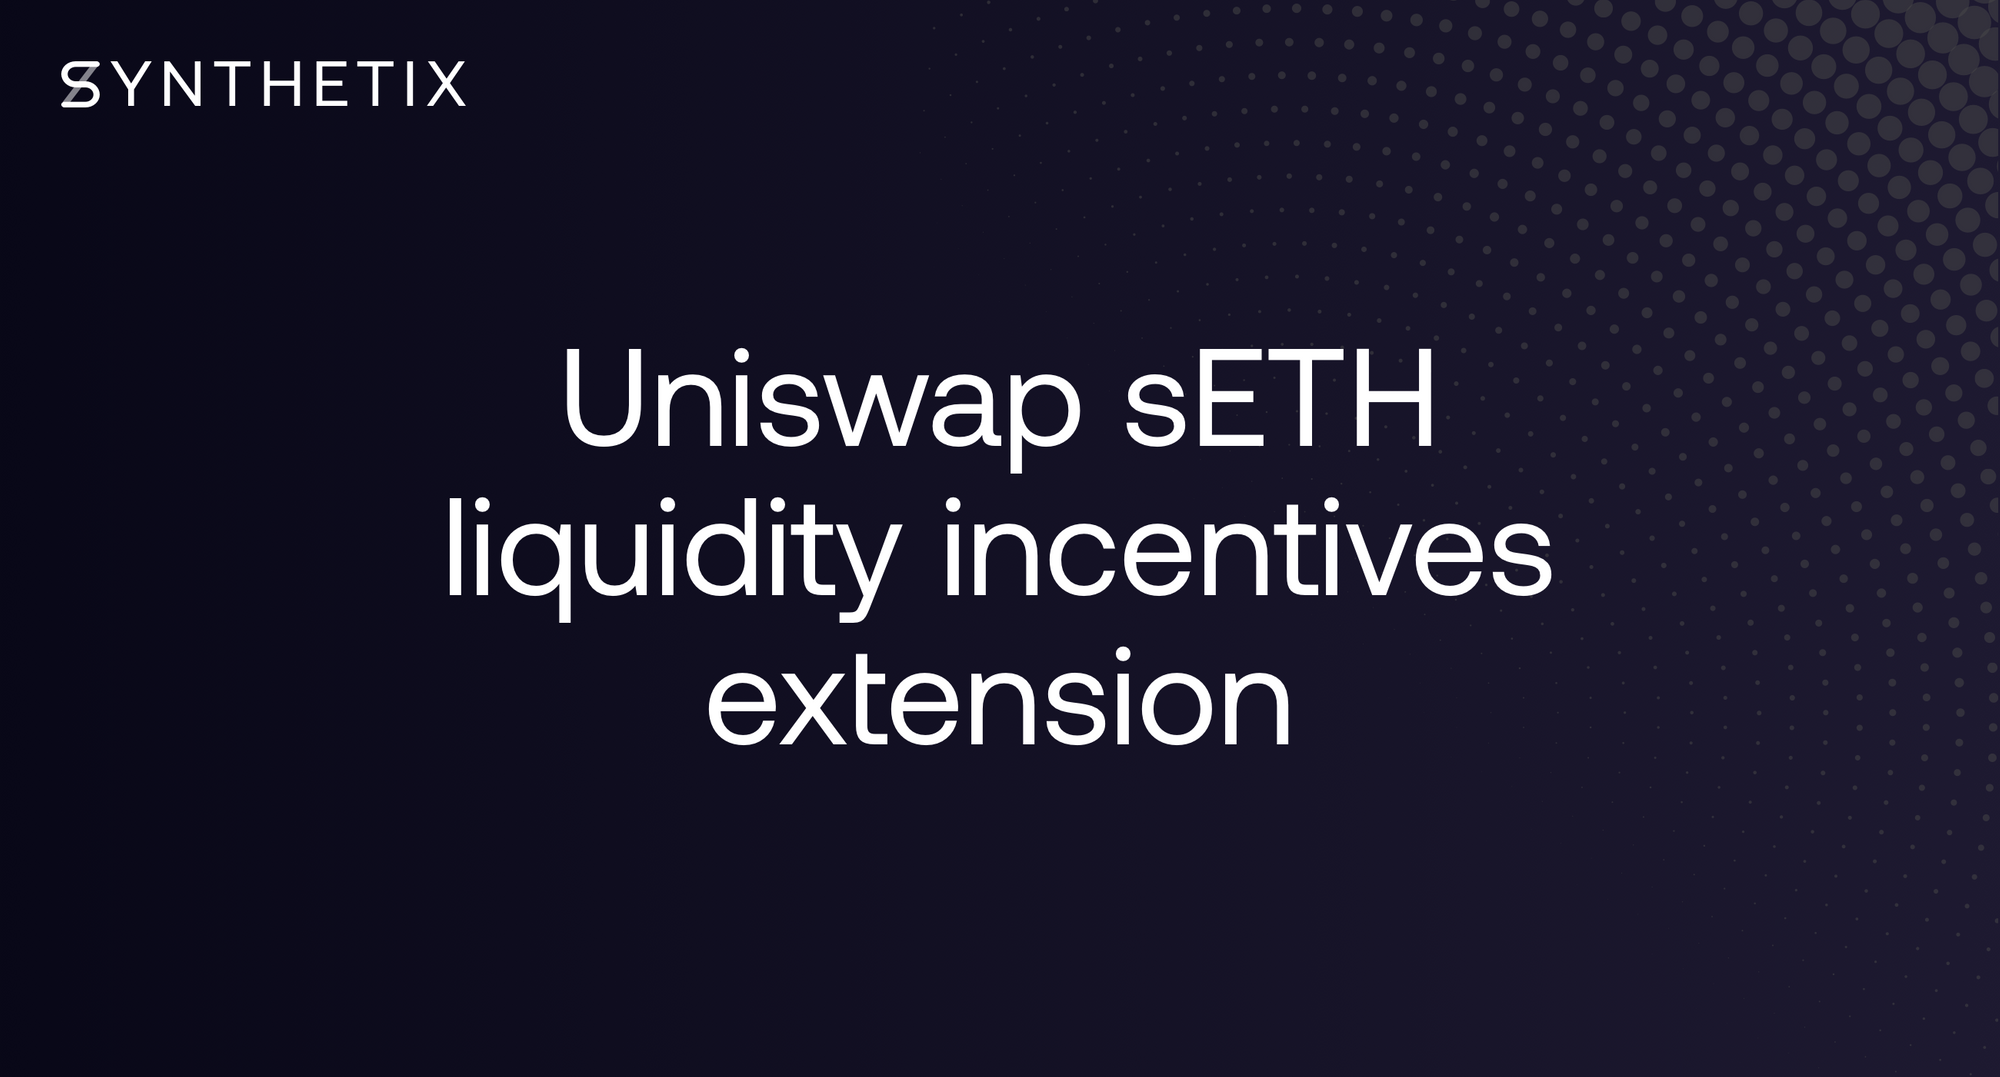 We’re extending the incentive trial for sETH liquidity on Uniswap for an extra week